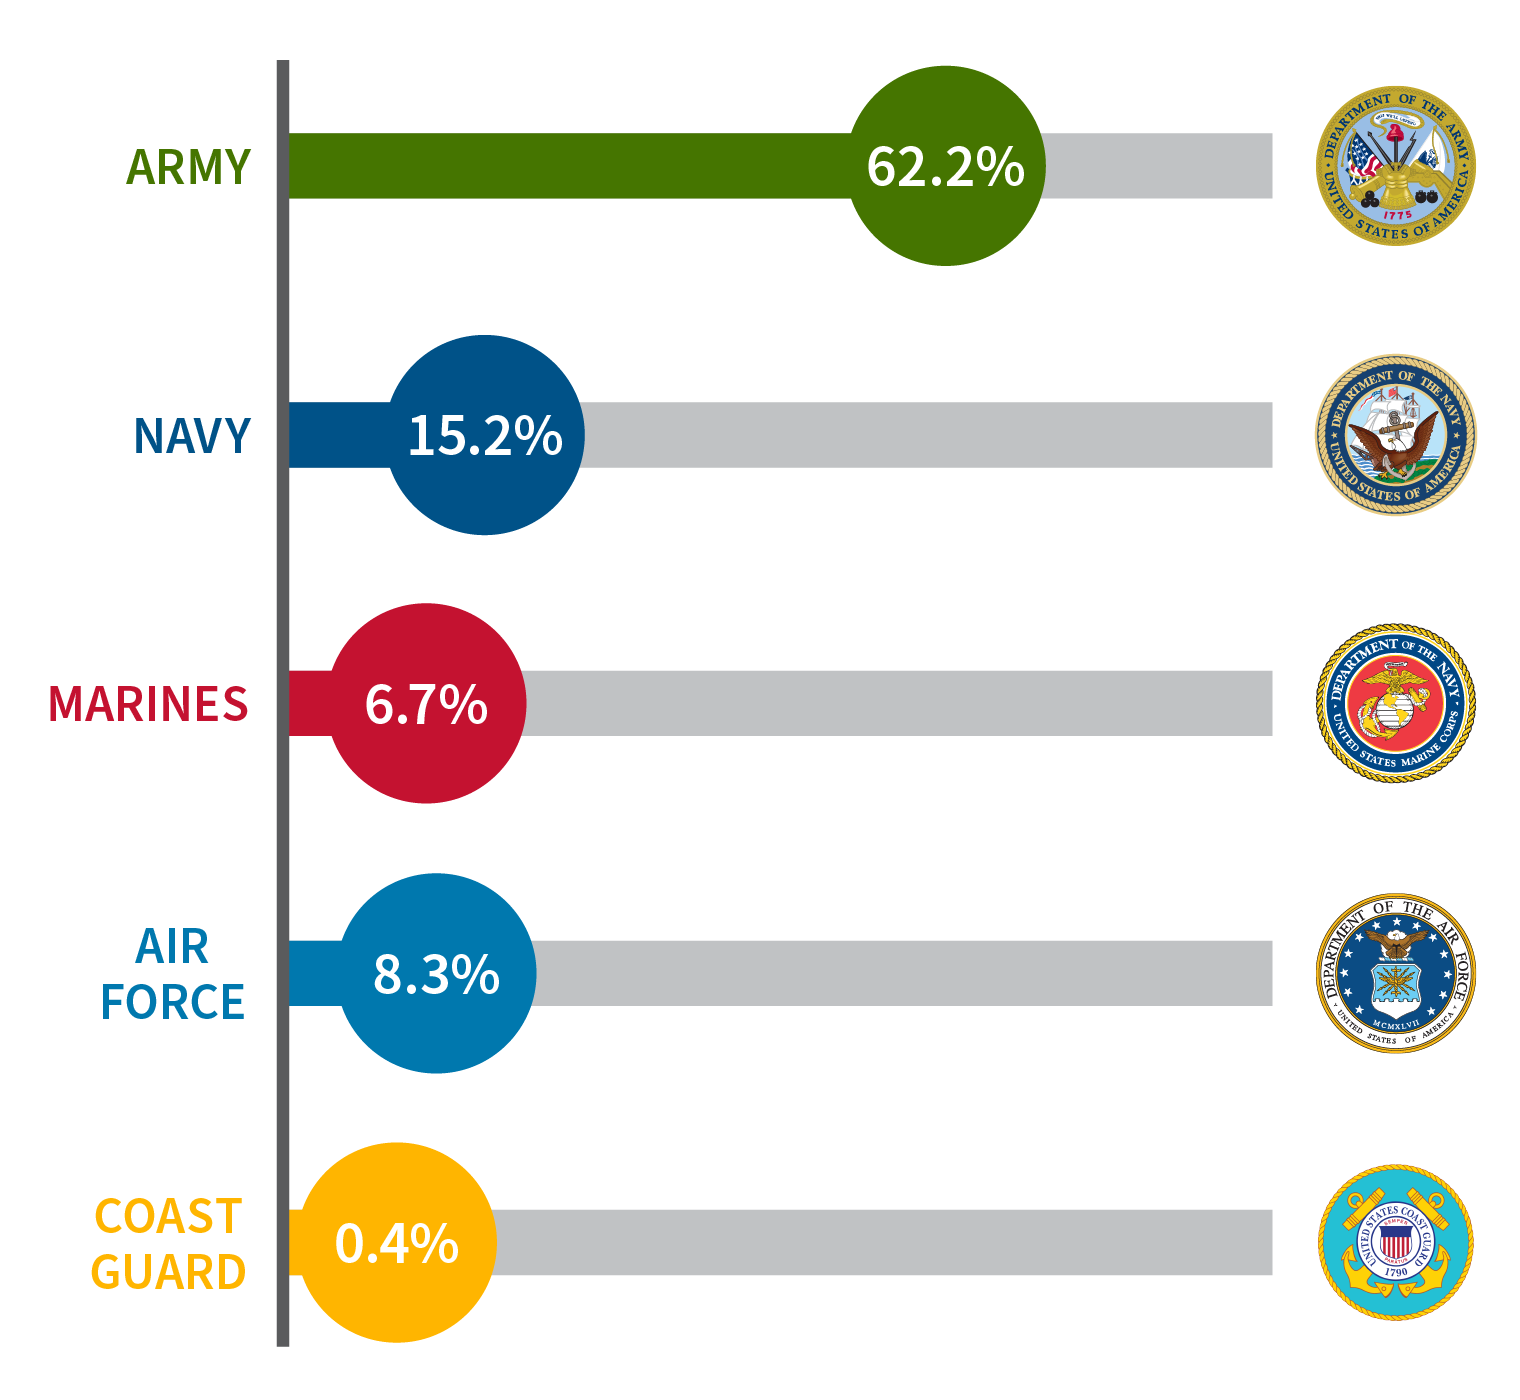 Graphic showing percentages by service branch, Army - 62.2, Navy - 15.2, Marines - 6.7, Air Force - 8.3, Coast Guard - 0.4